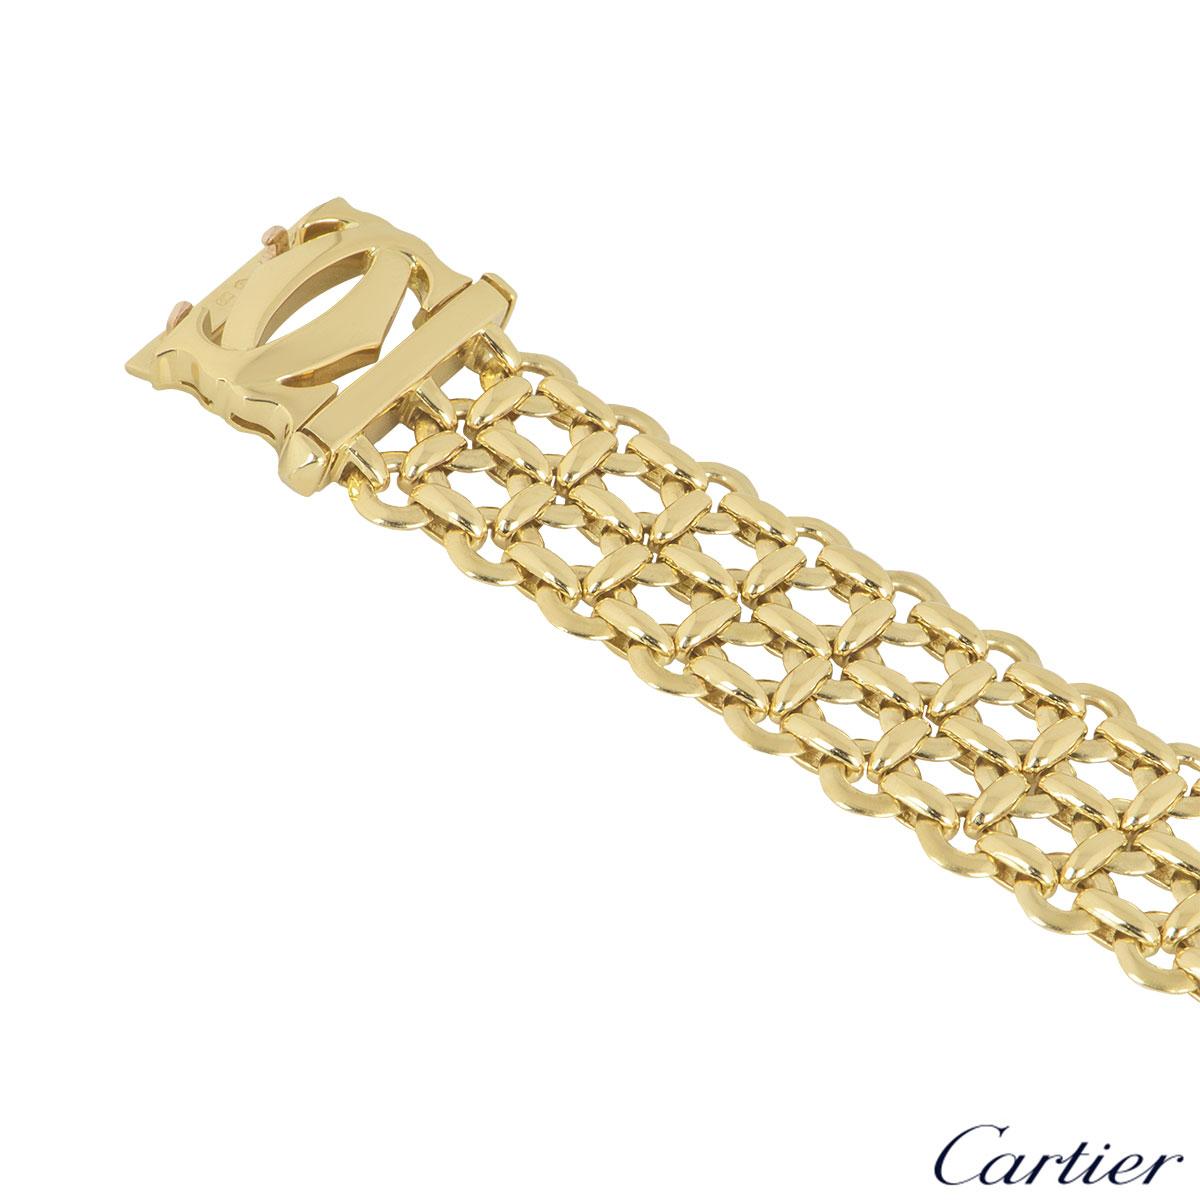 An 18k yellow gold bracelet by Cartier from the Penelope collection. The bracelet comprises of the iconic double c motif clasp on a 3 row cable style chain. The bracelet has a length of 7.00 inches and a gross weight of 60.00 grams. The bracelet